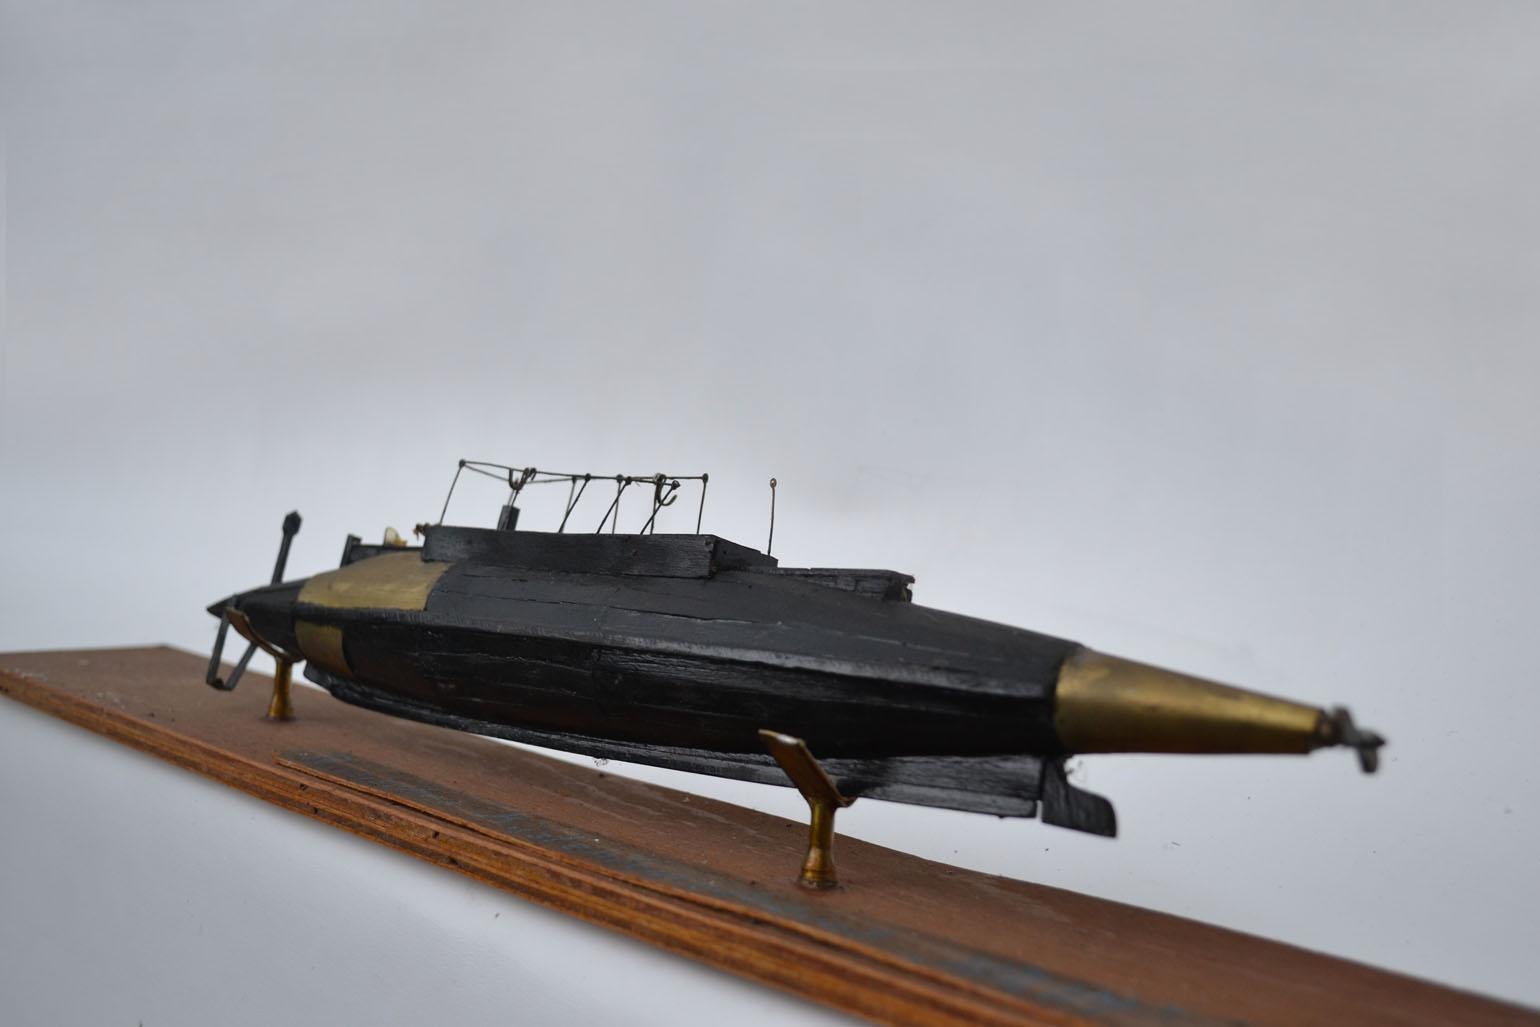 A model of an early Torpedo ship. This model of USSR Submarine 'Nalim' late 19th century. It is handcrafted early mid-20th century from Eastern Europe with lots of character and highly collectable.
It came from a private collection of torpedo boats